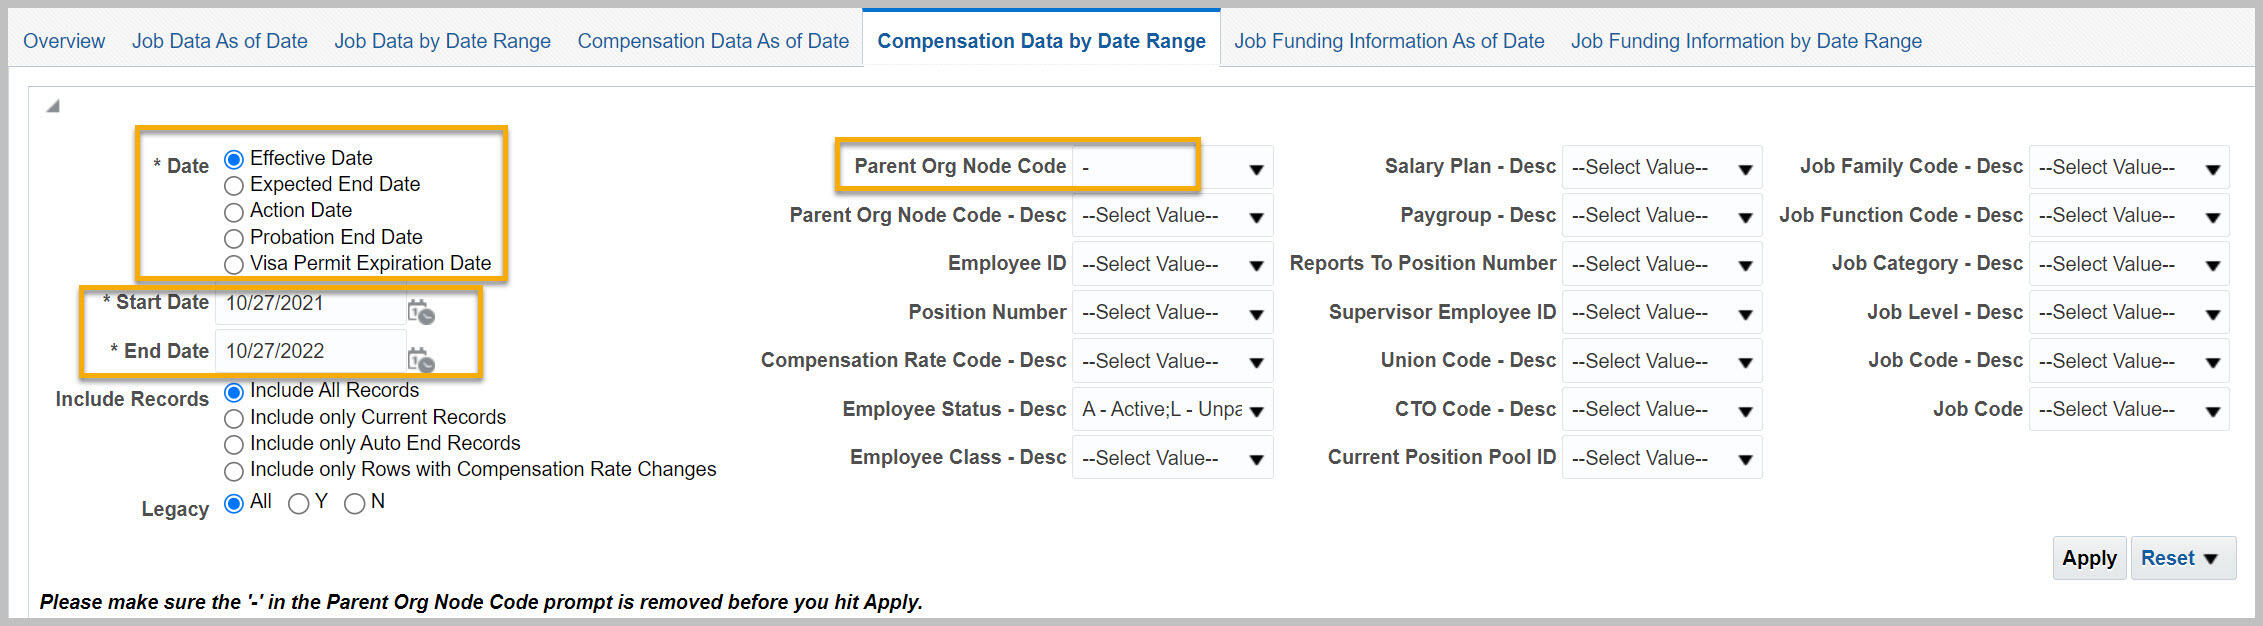 Filters for Workforce Detail, Compensation Data by Date Range